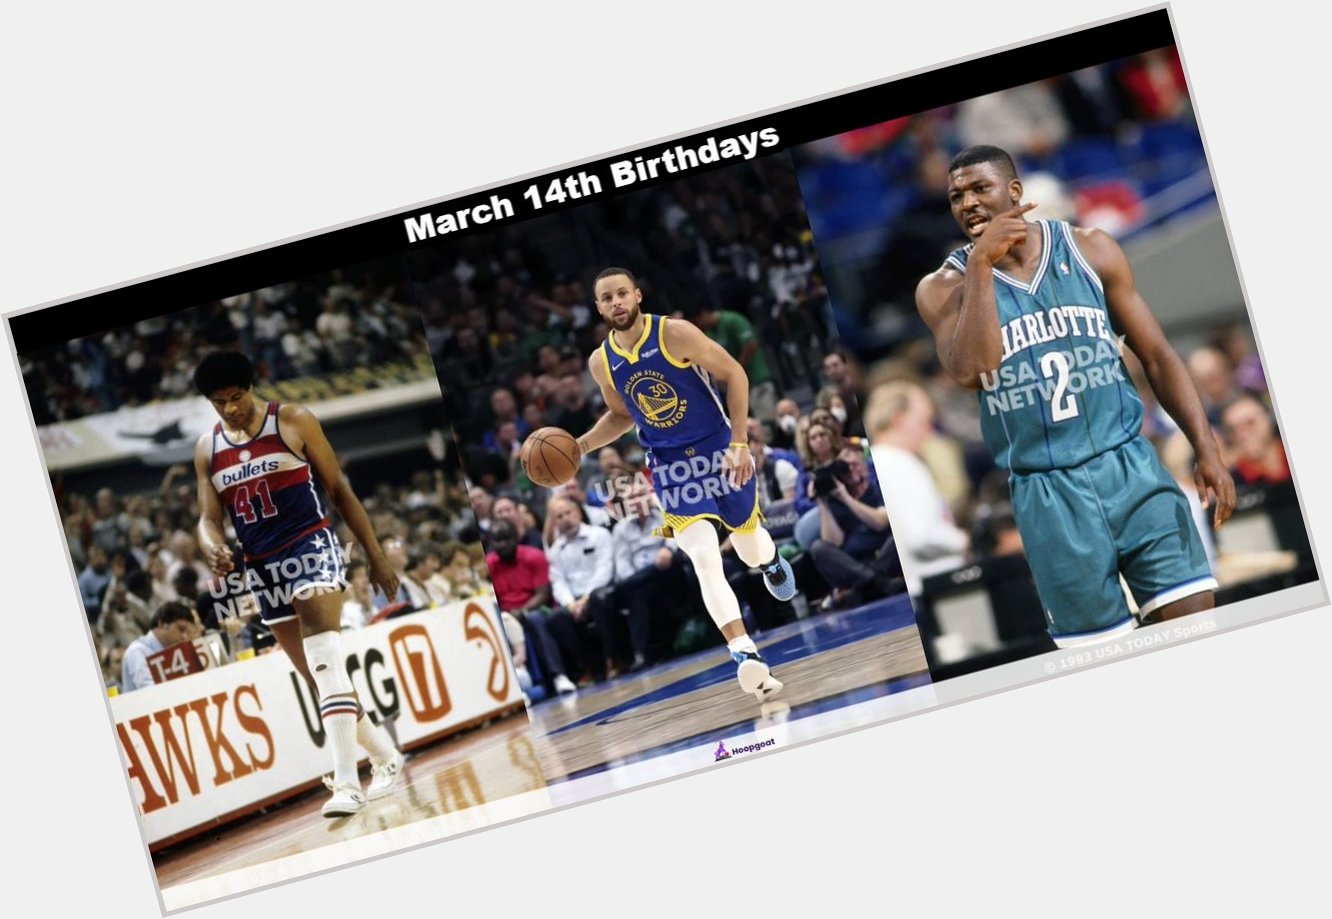 Happy Birthday to Steph, LJ and Wes Unseld!     